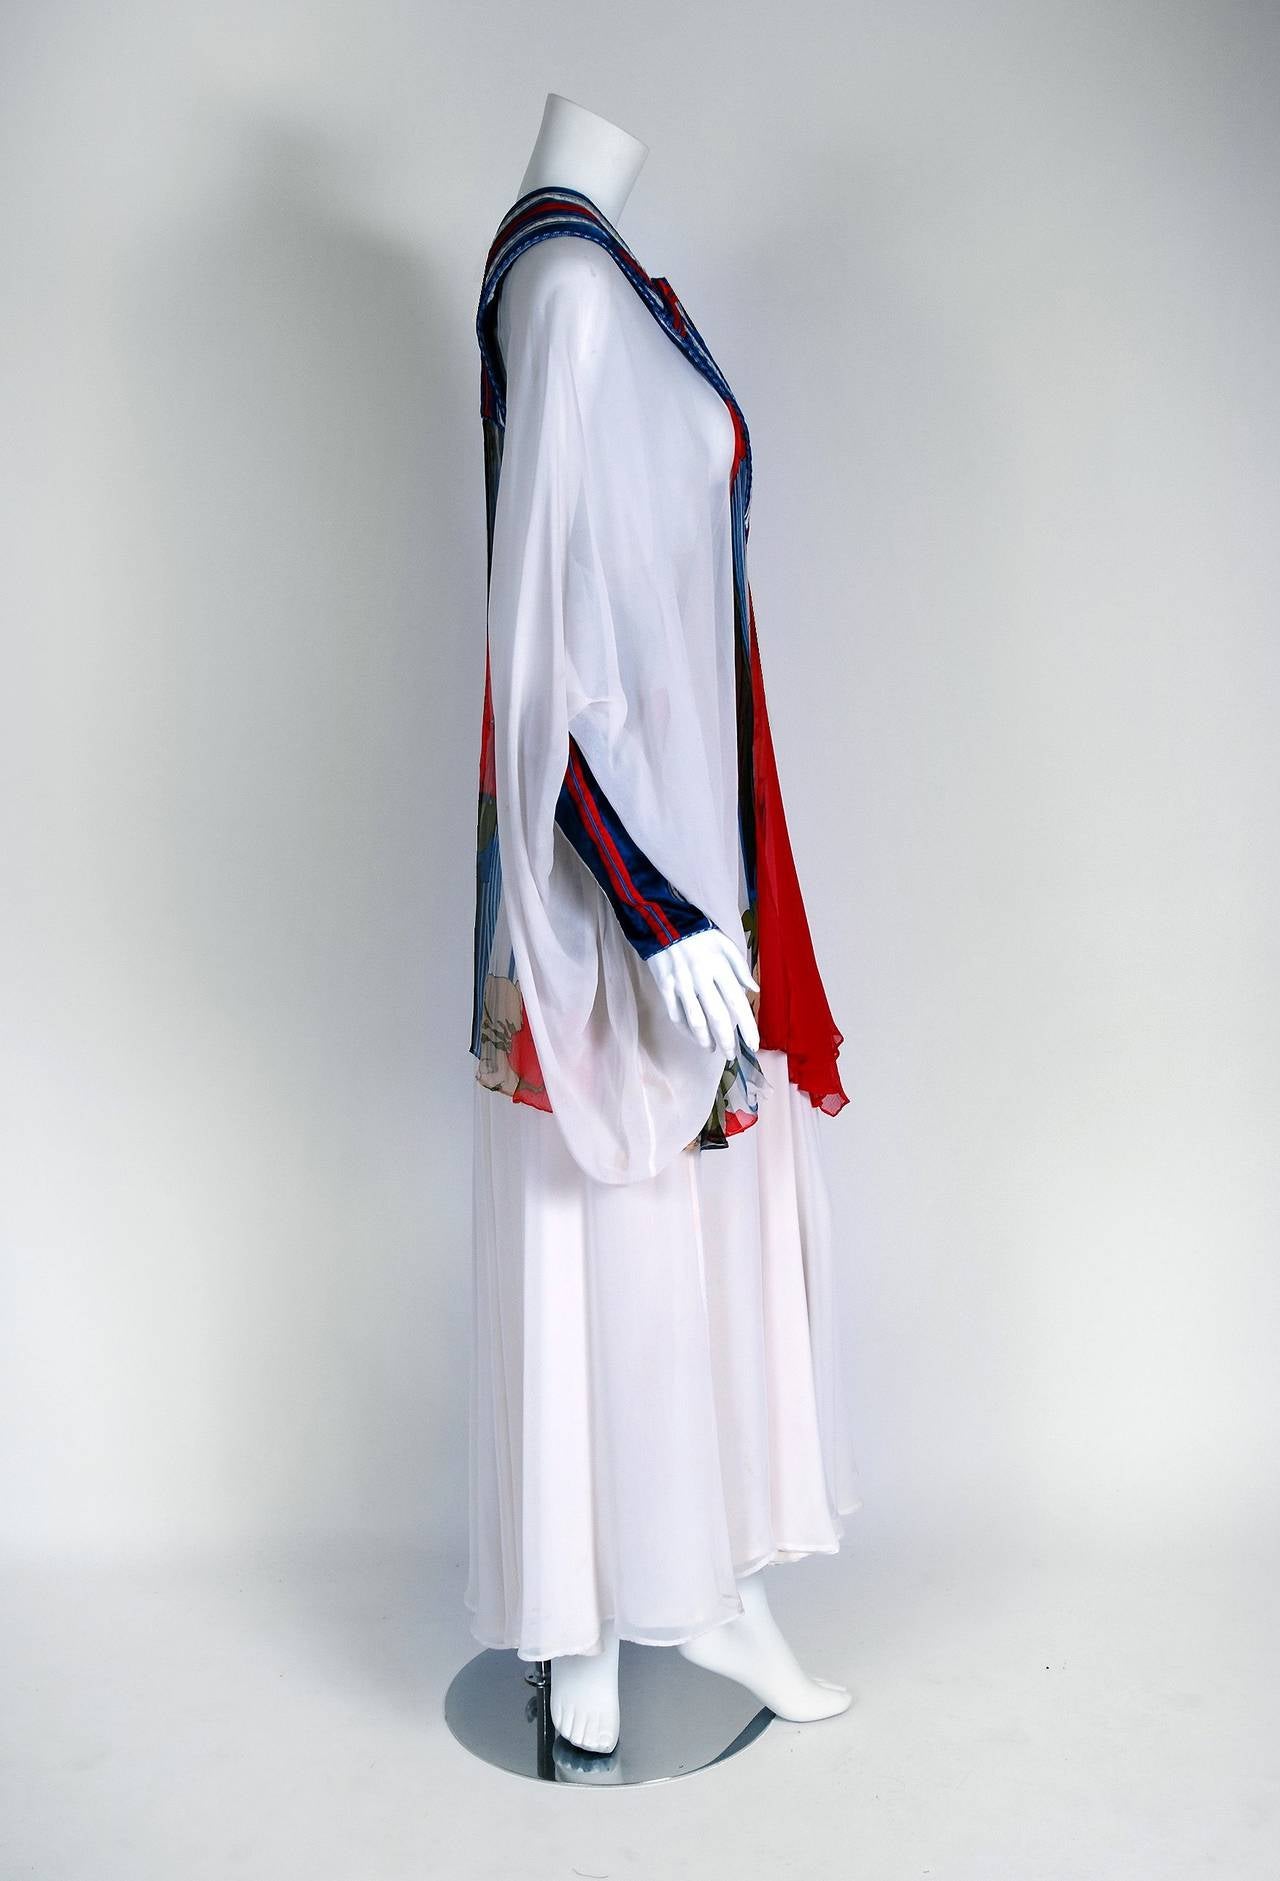 Sensational 1970's bohemian caftan dress by British designer Marisa Martin. In 1969 she opened her first shop in Knightsbridge, London. During 1976 she joined the London Designer Collections and added a successful wholesale range to her business.